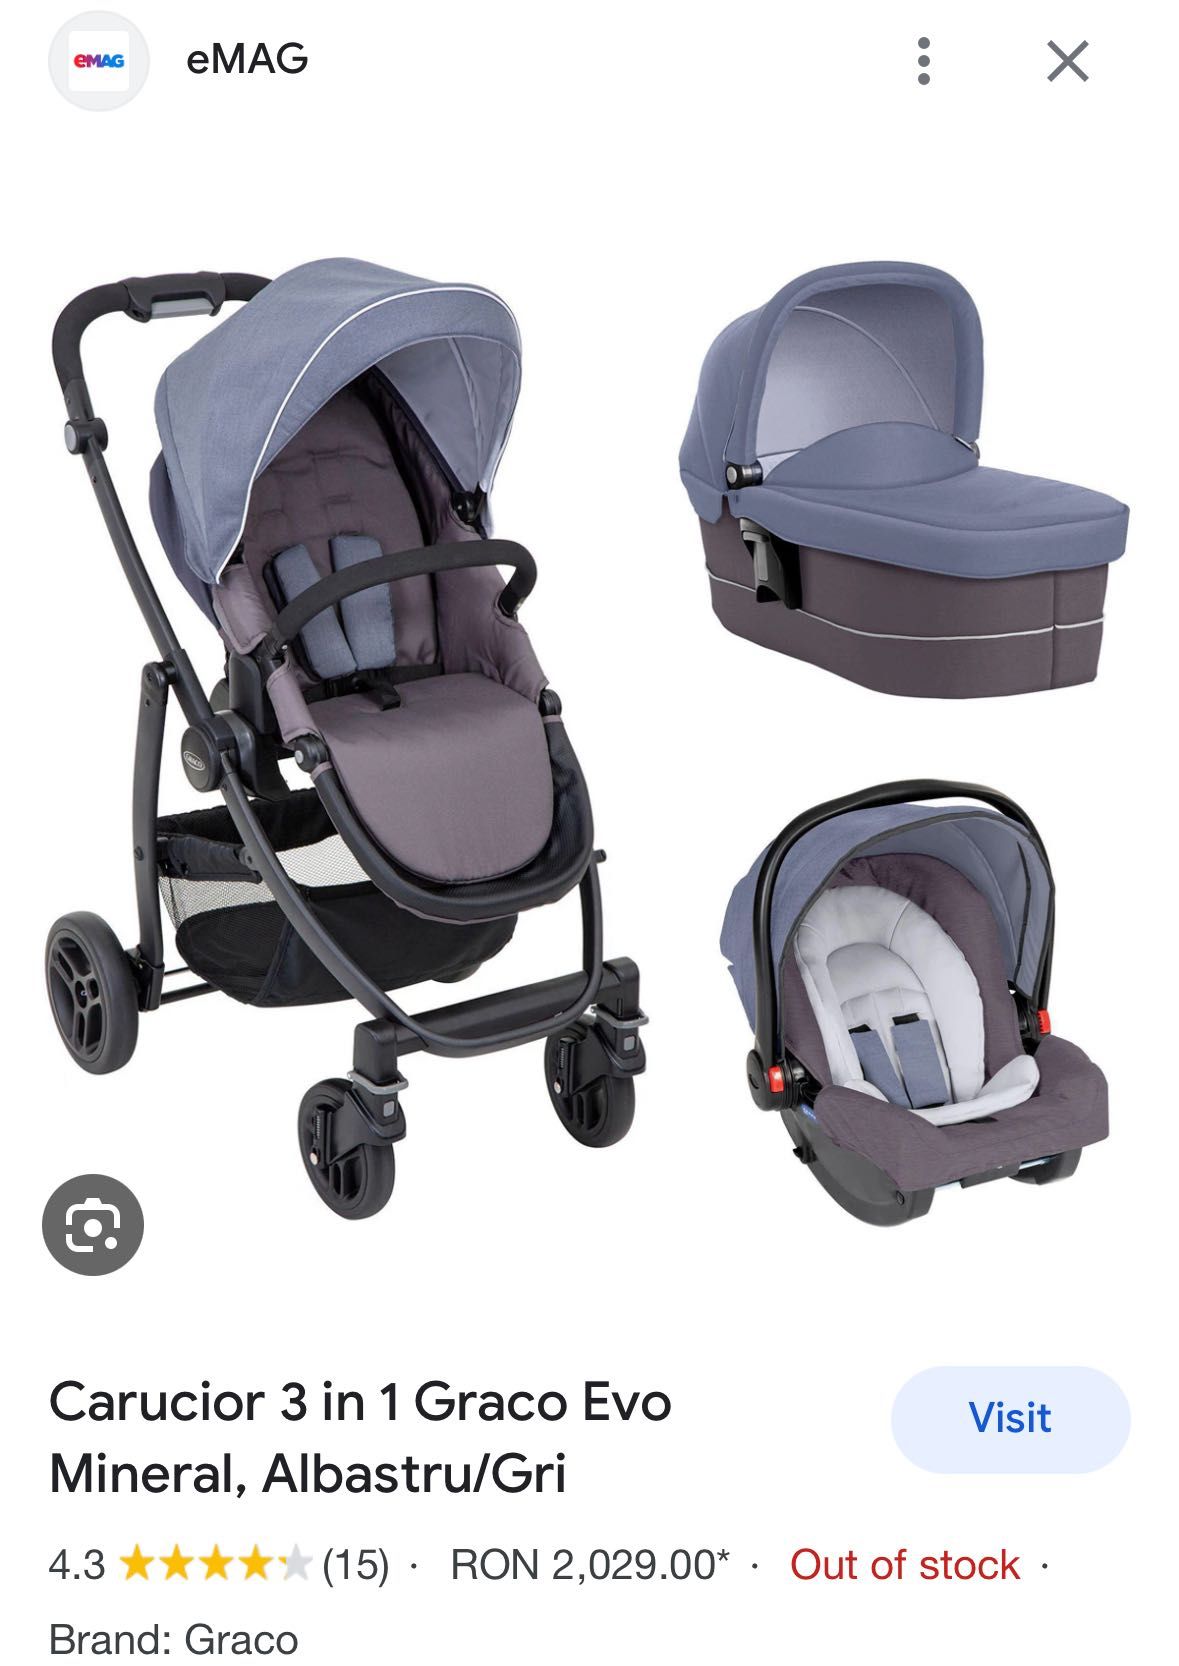 Vand carut Graco 3 in 1